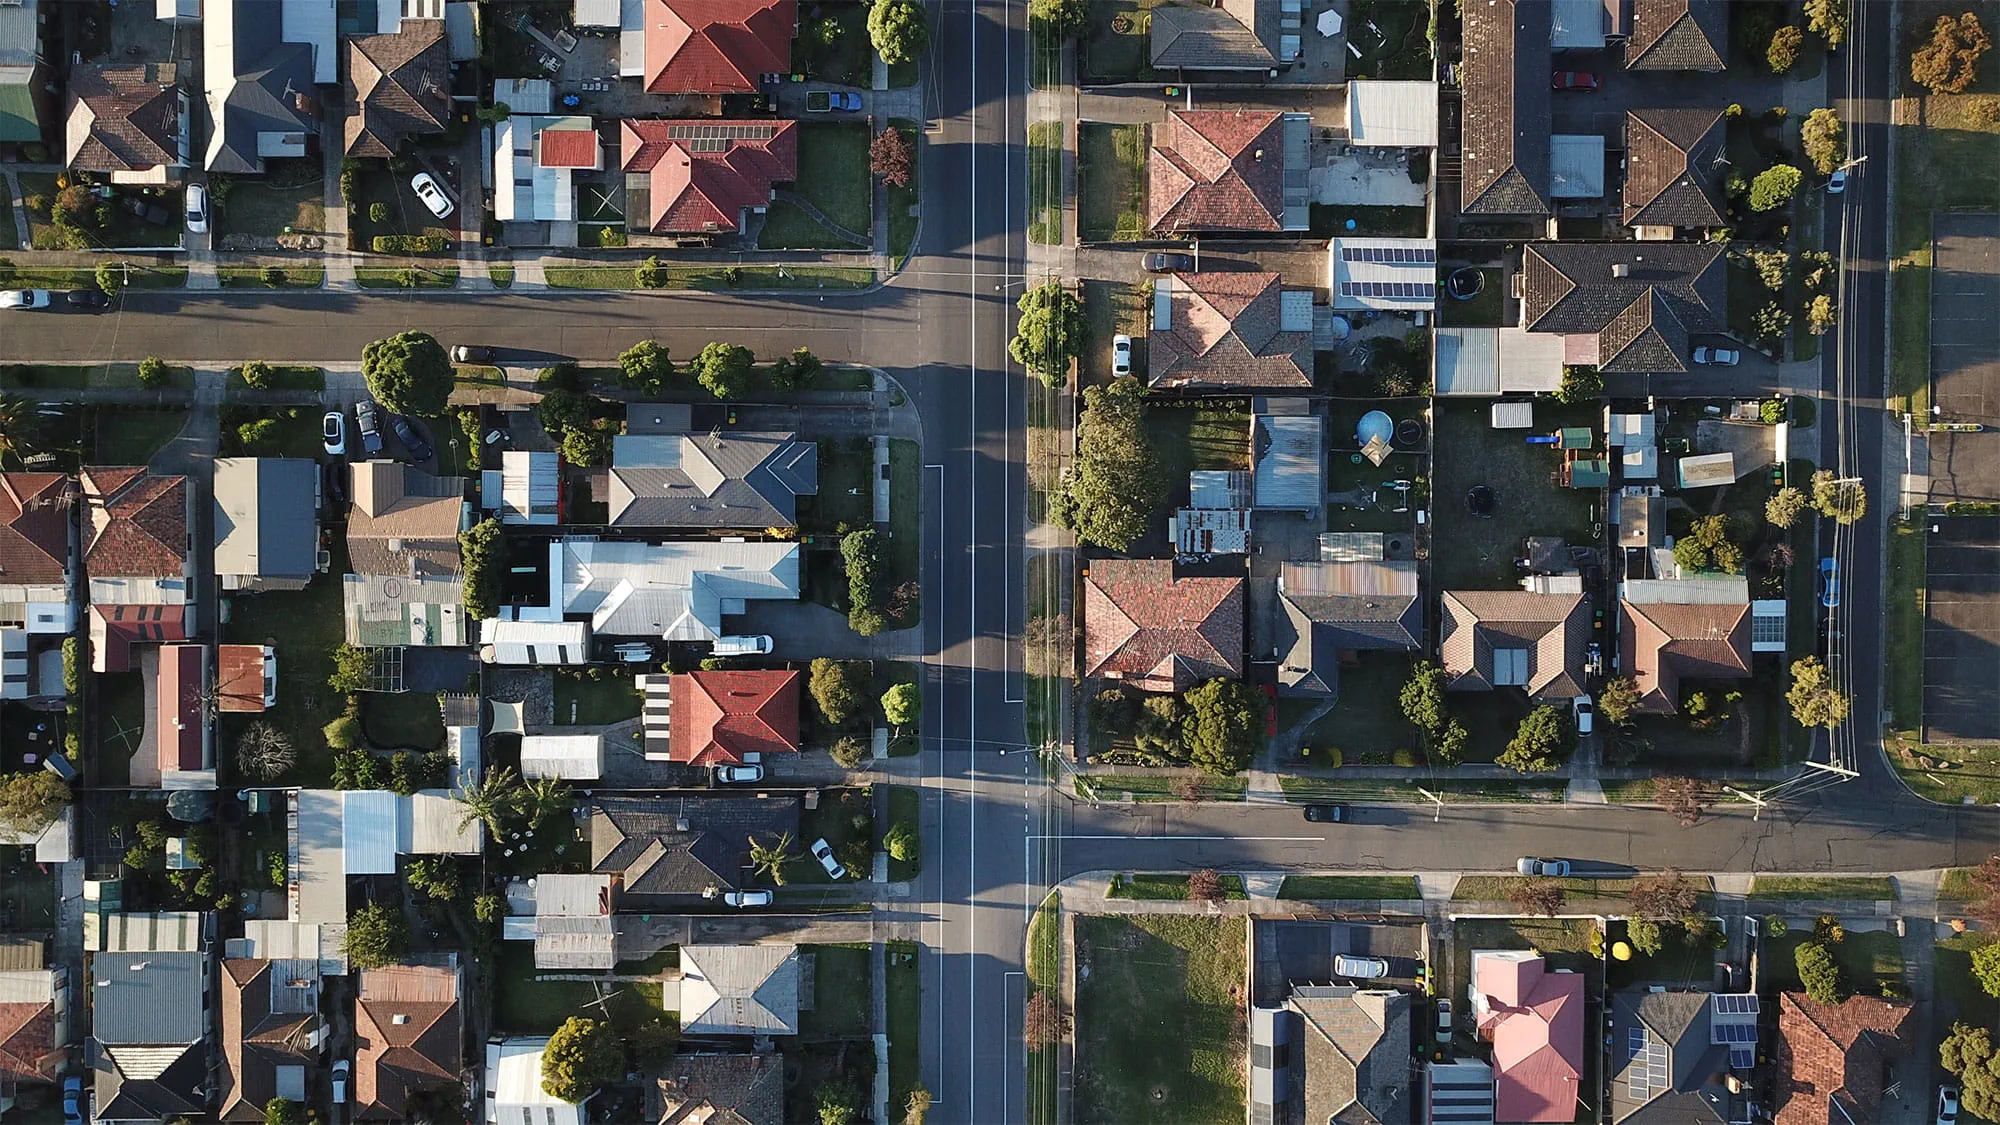 Melbourne suburb_Photo by Tom Rumble on Unsplash